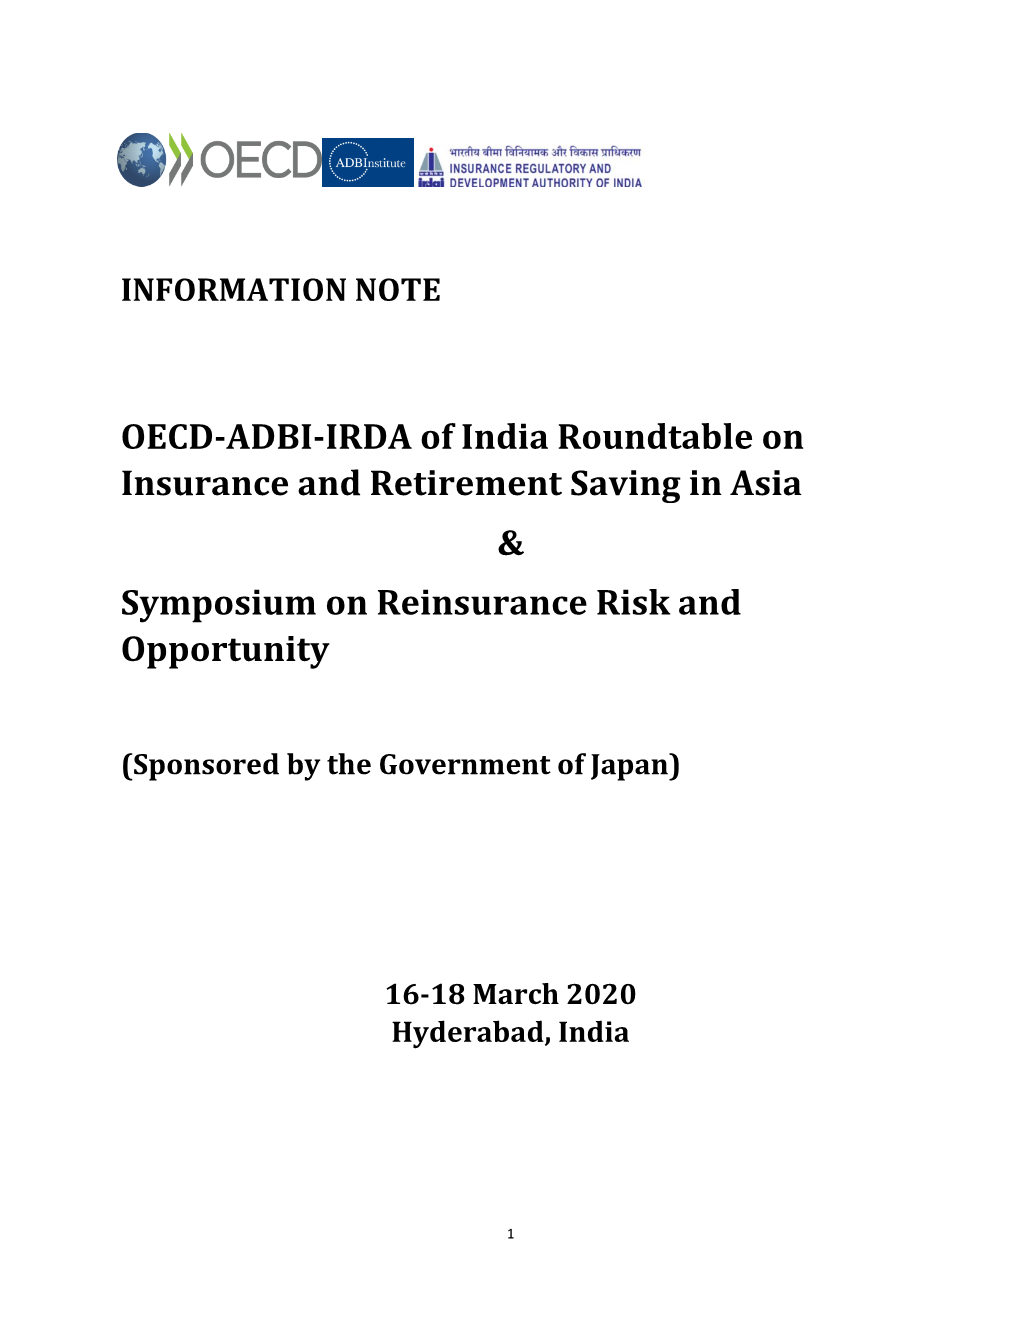 OECD-ADBI-IRDA of India Roundtable on Insurance and Retirement Saving in Asia & Symposium on Reinsurance Risk and Opportunity